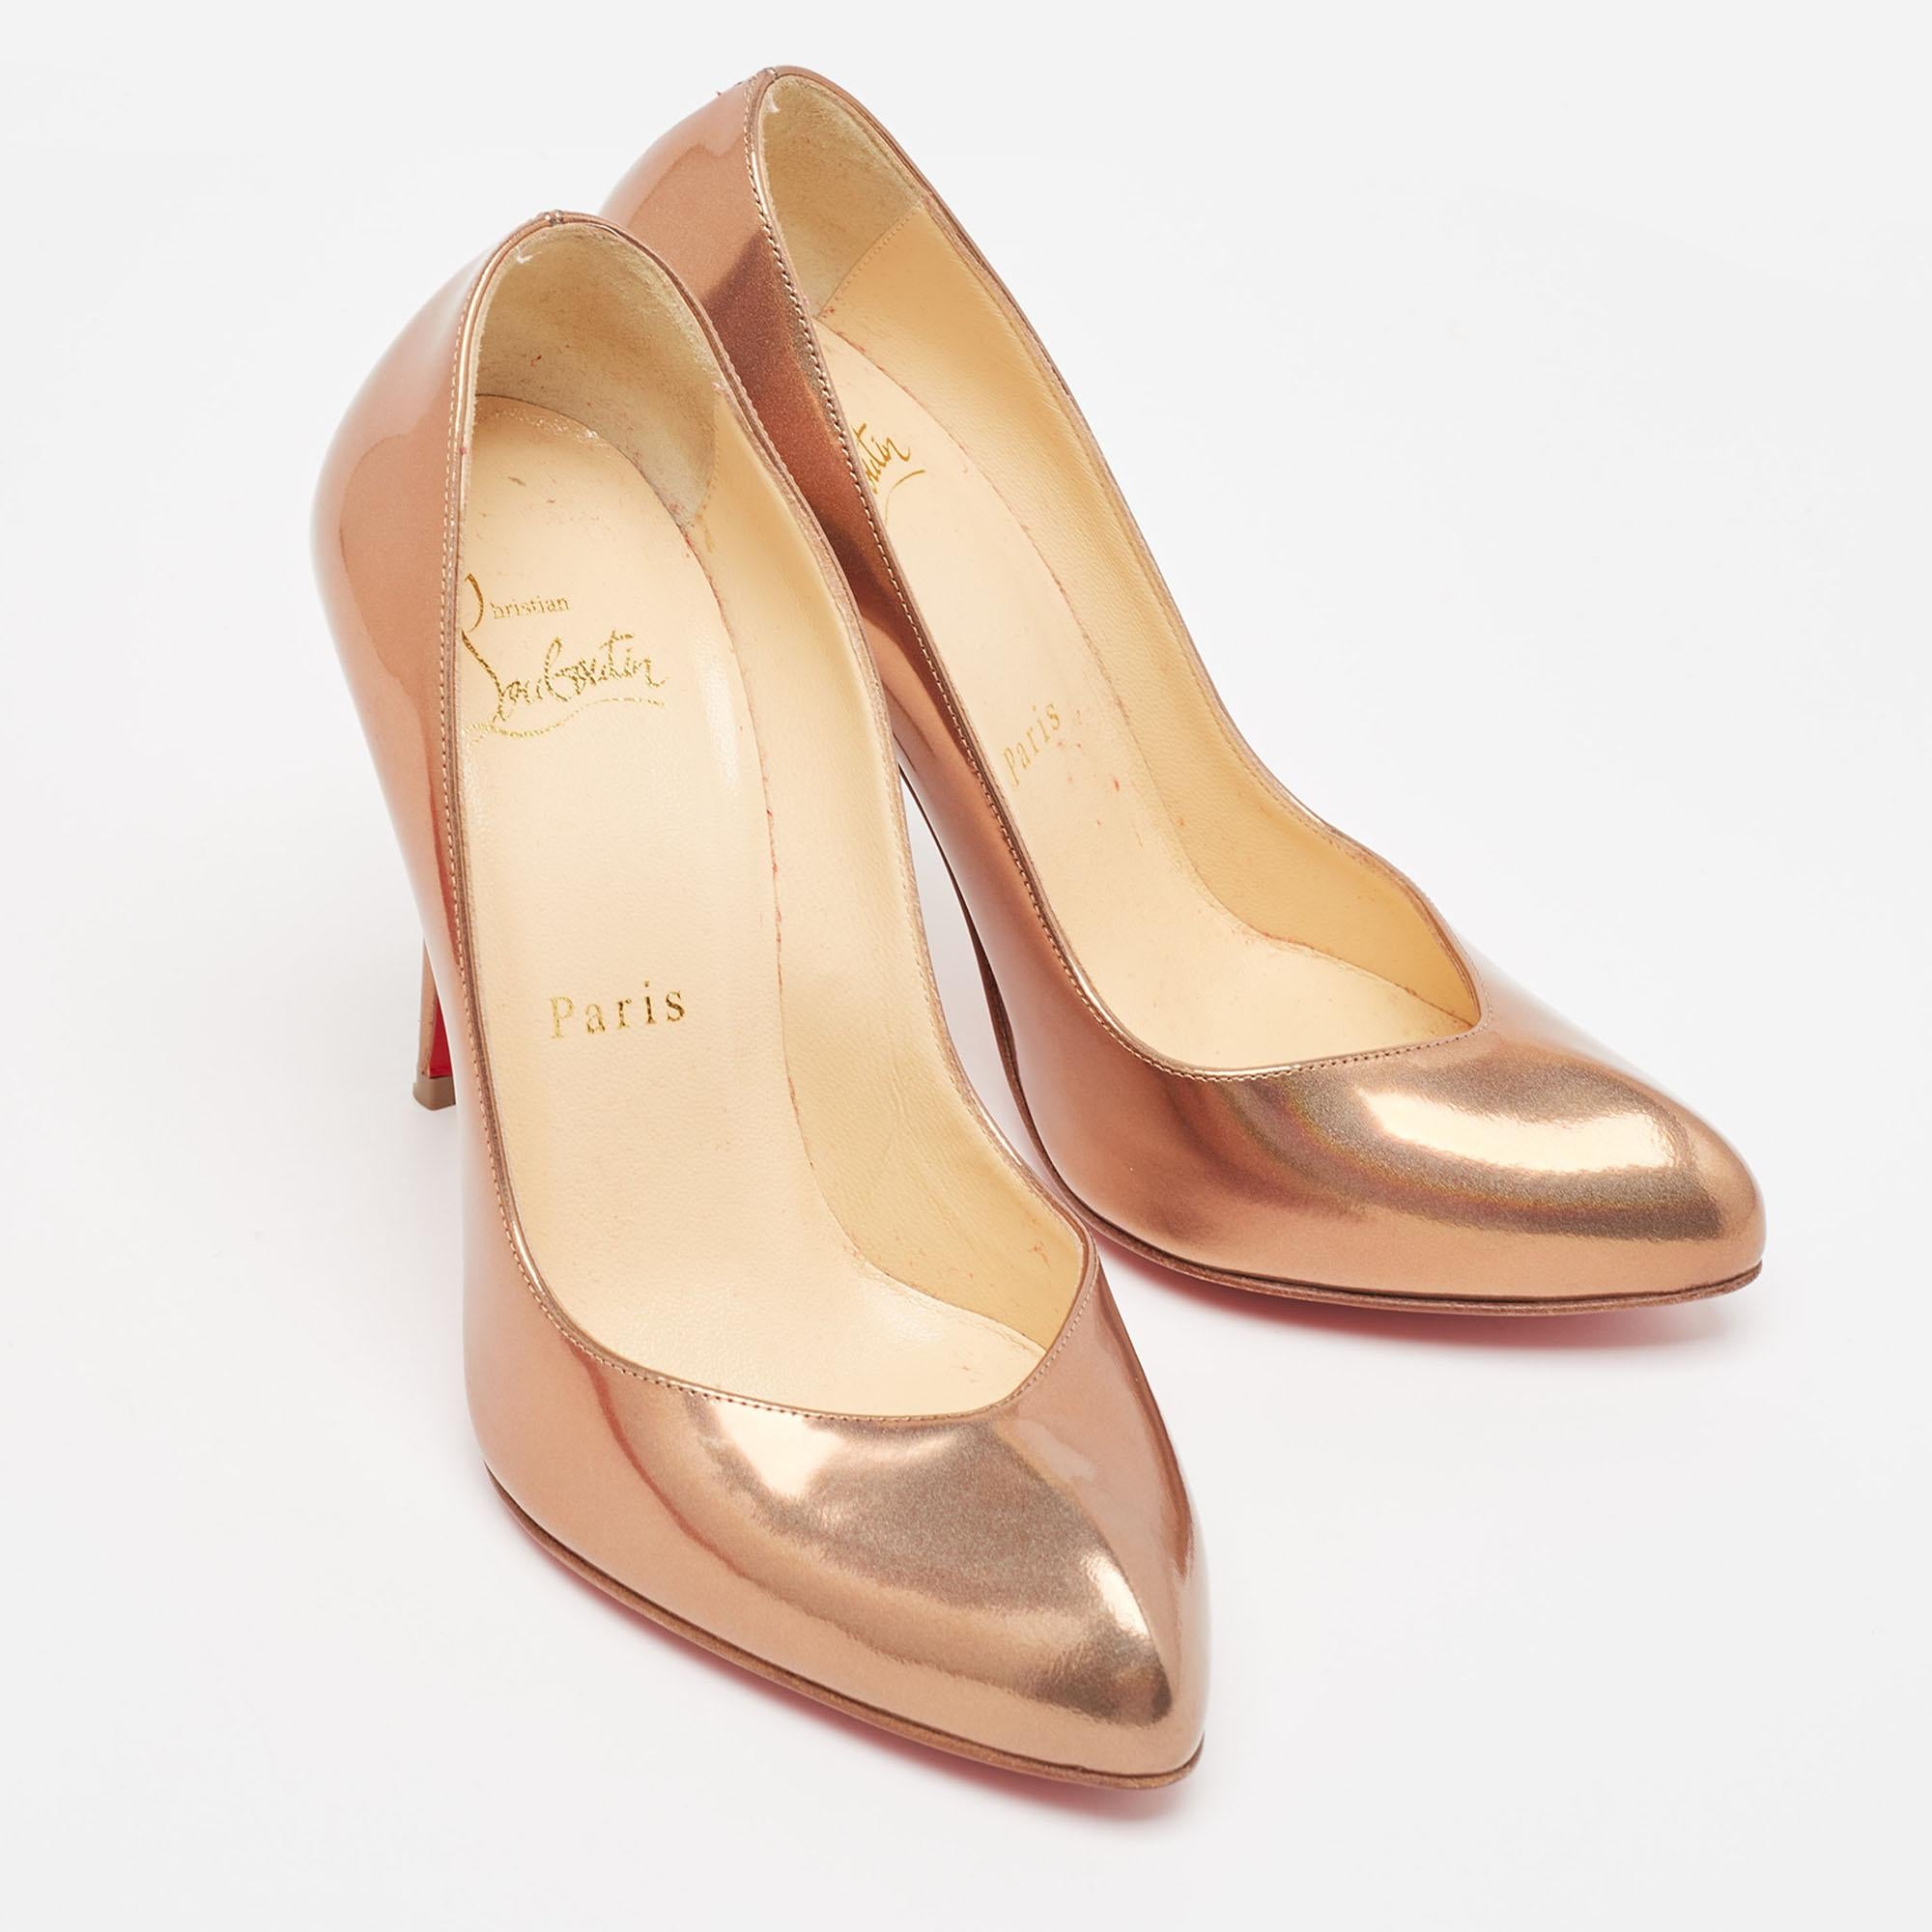 Christian Louboutin Metallic Brown Leather Breche Pumps Size 35.5 For Sale 3